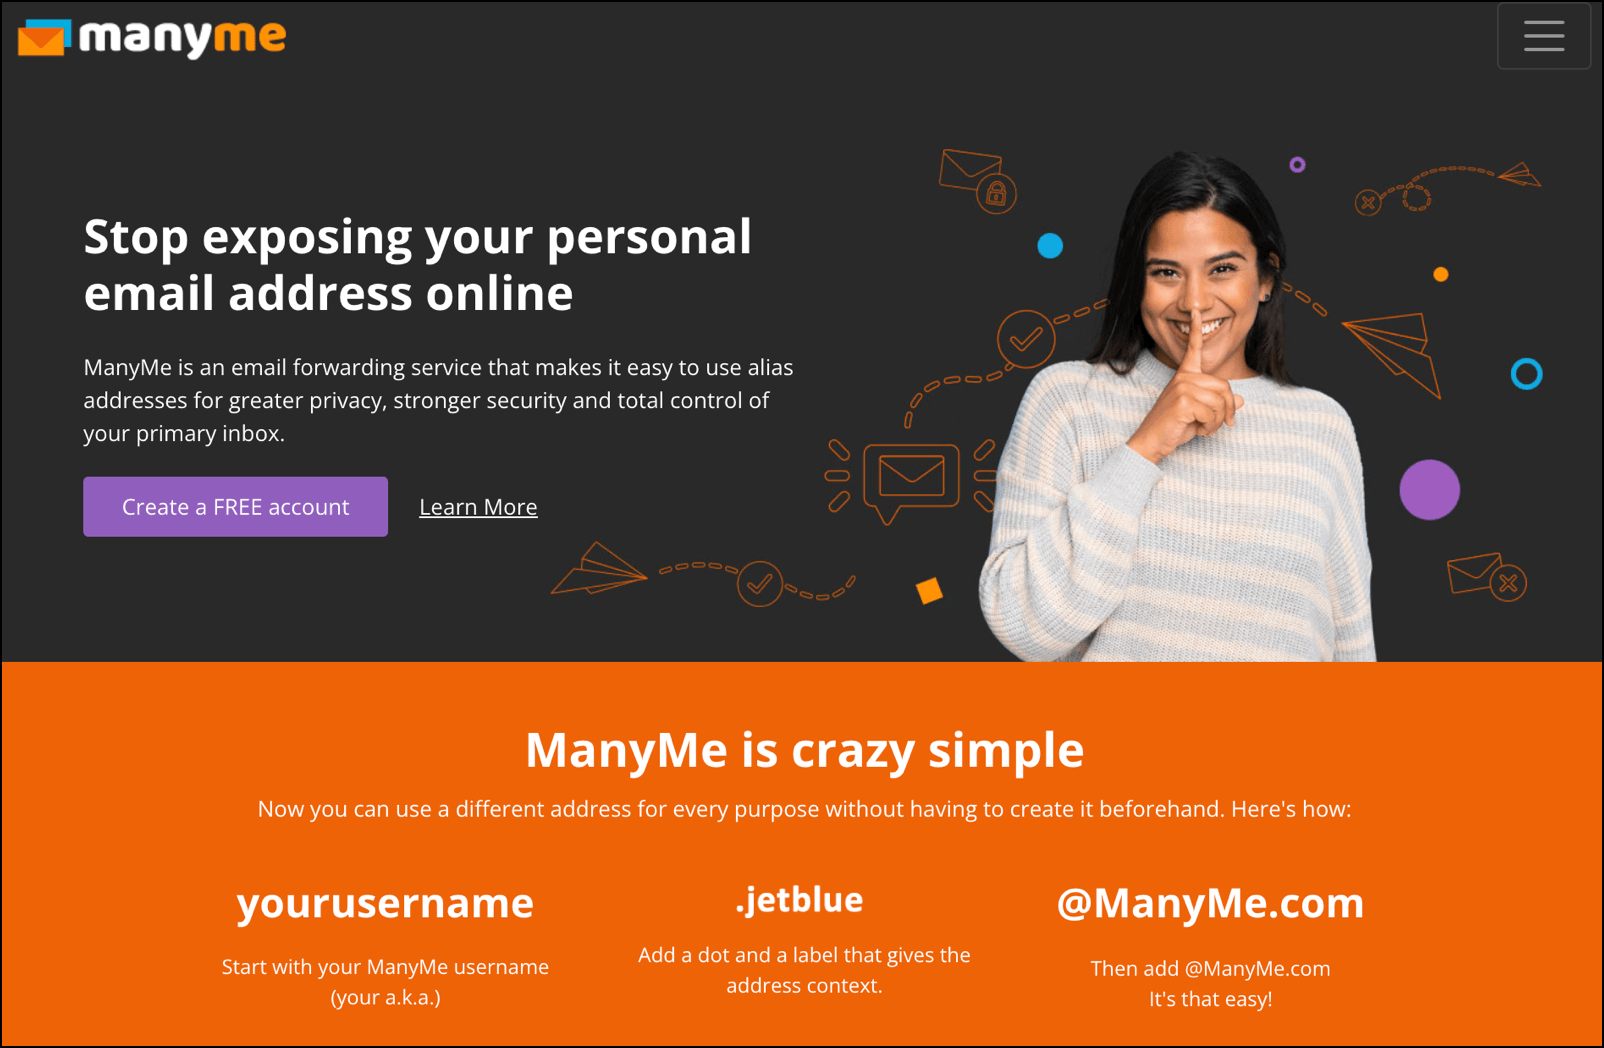 ManyMe's landing page